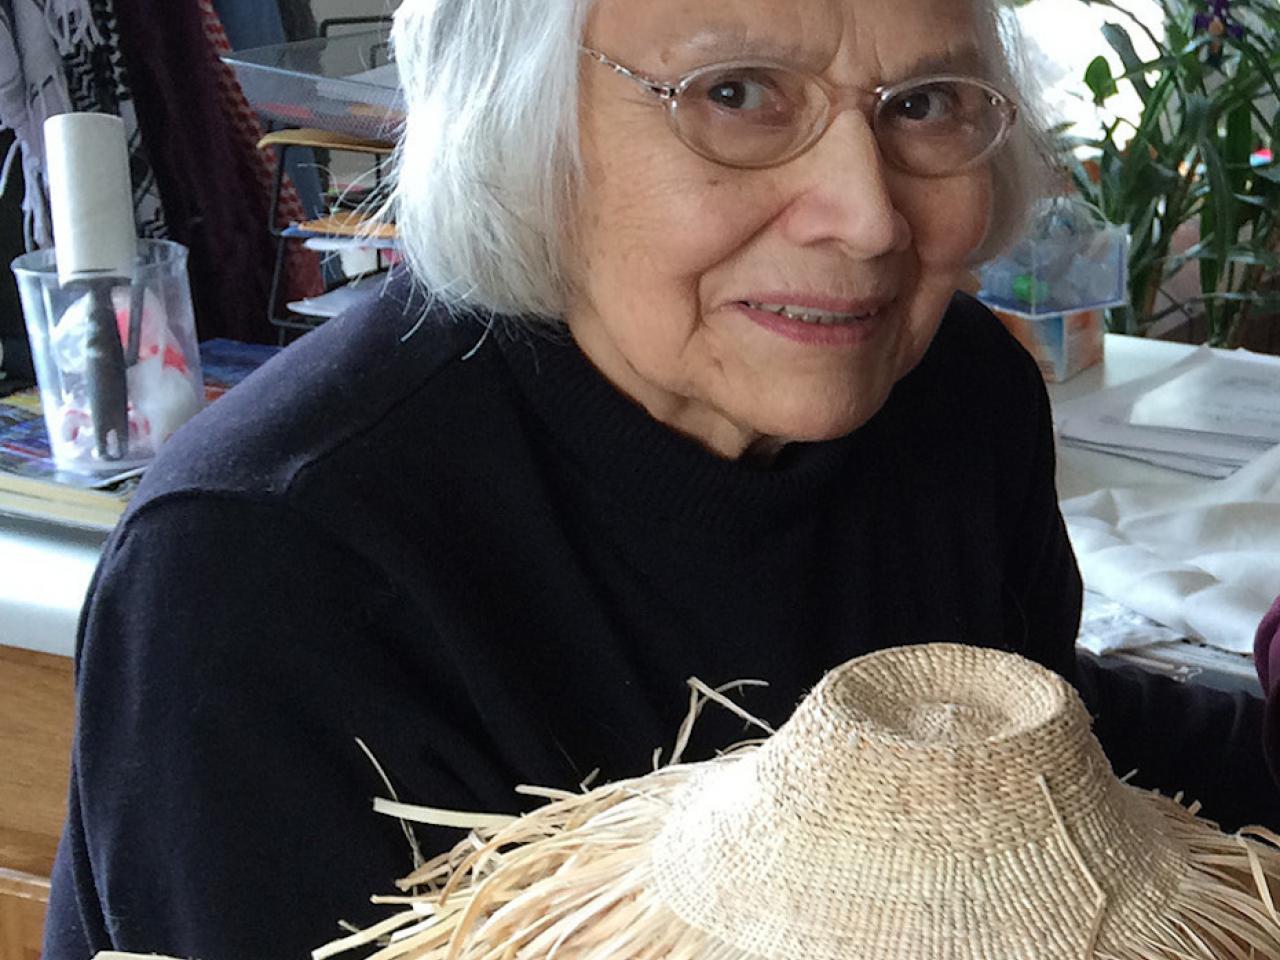 Haida elder and weaver Delores Churchill smiles at the camera. She is wearing glasses and a black top. She holds up a weaving work in progress with the unfinished ends splaying out.